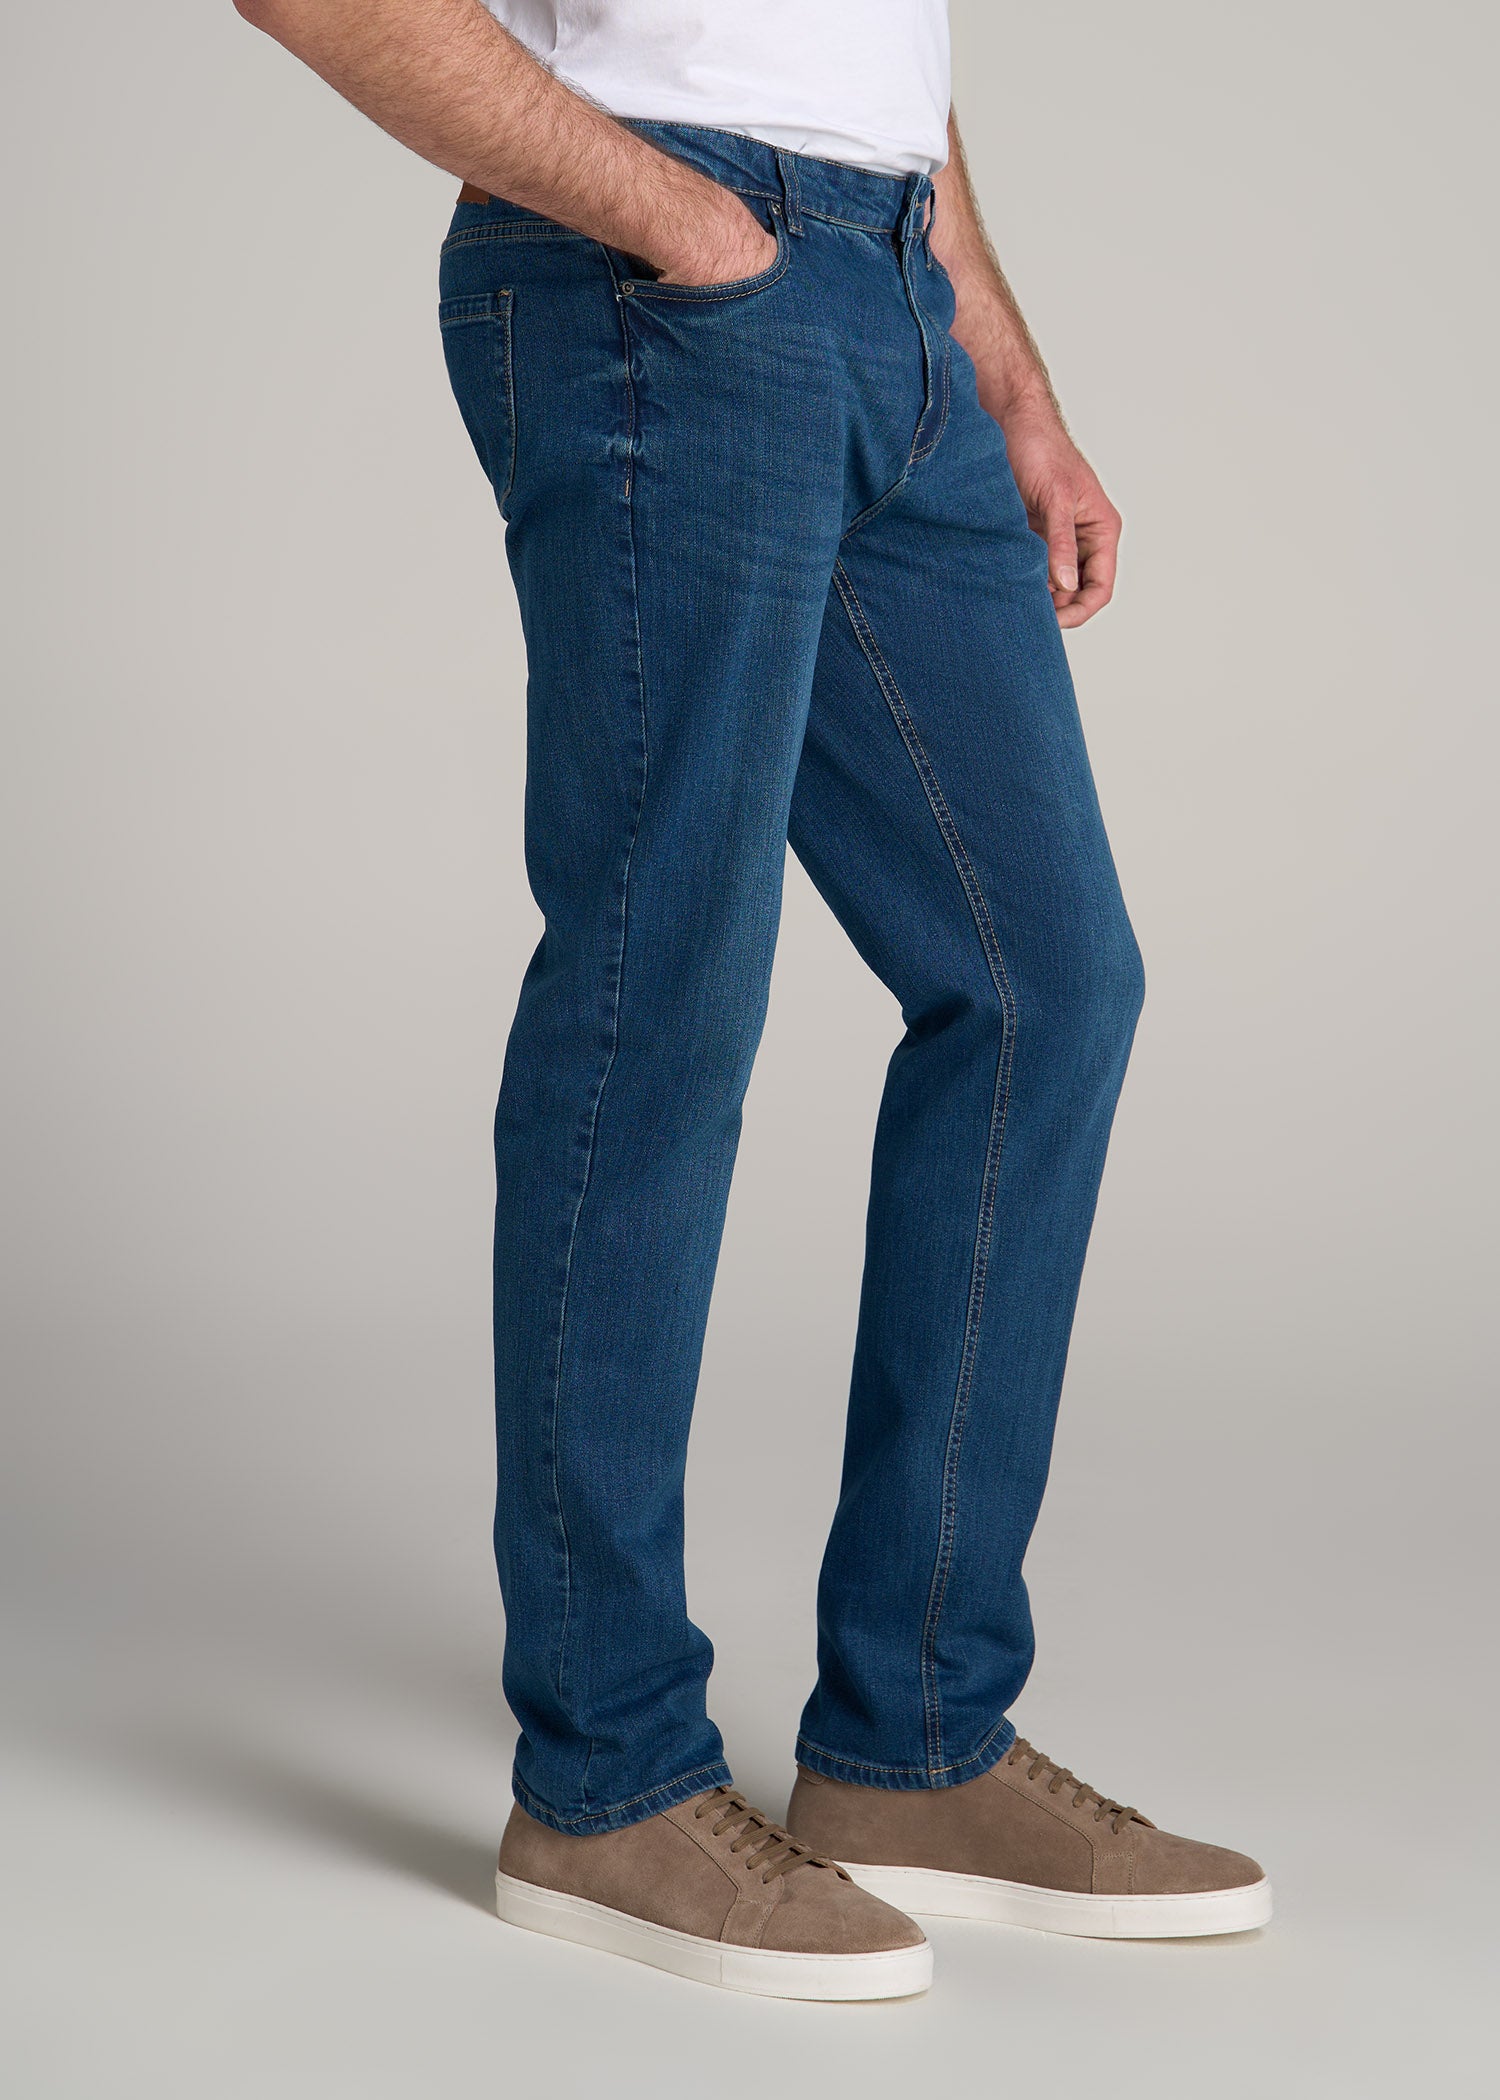 Semi-Relaxed Men\'s Jeans | Signature Tall Fade American